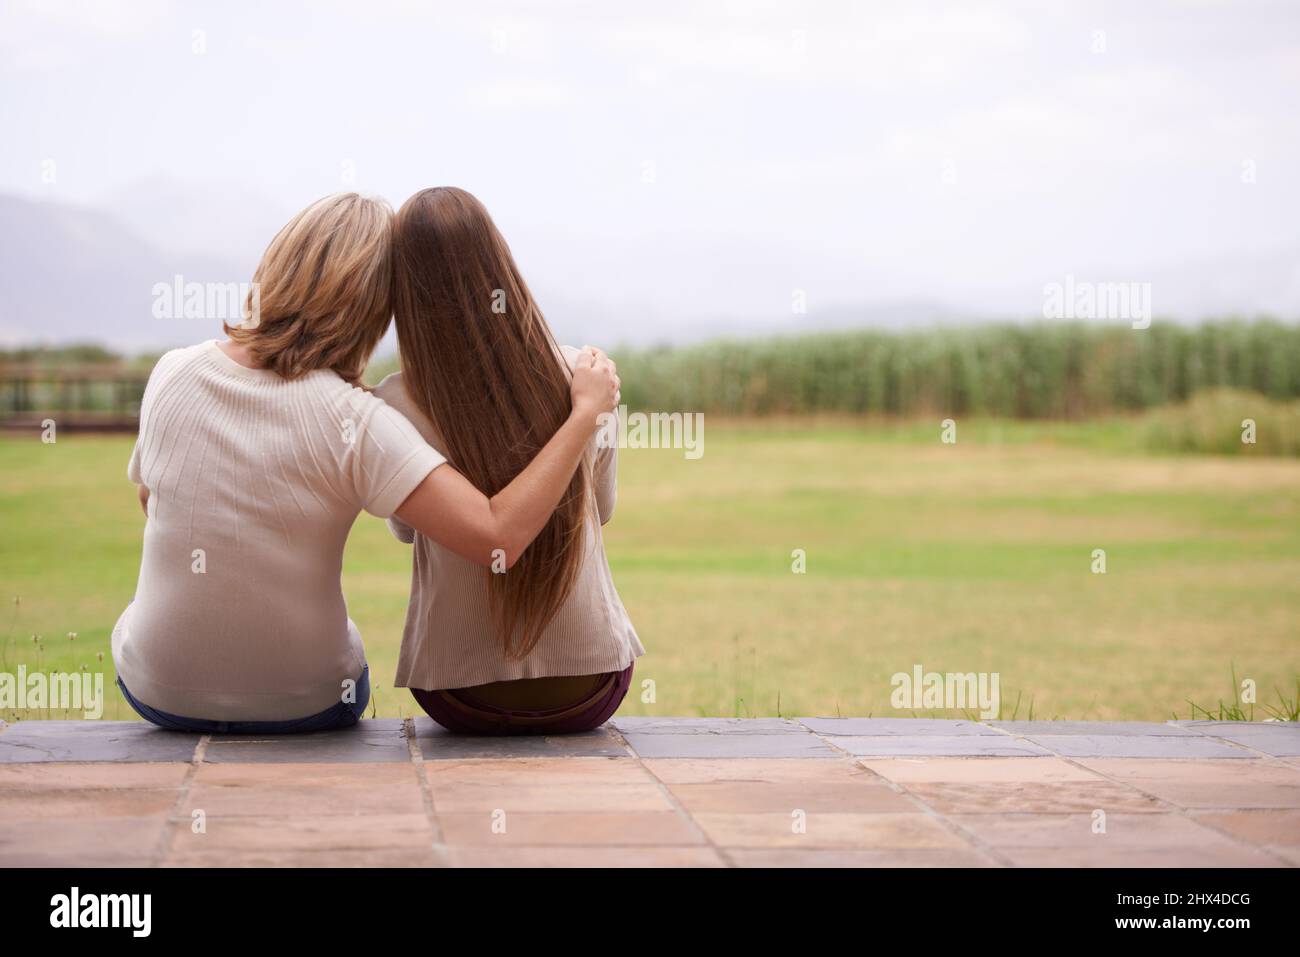 These moments together are so precious. An affectionate mother sitting outside with her adult daughter. Stock Photo